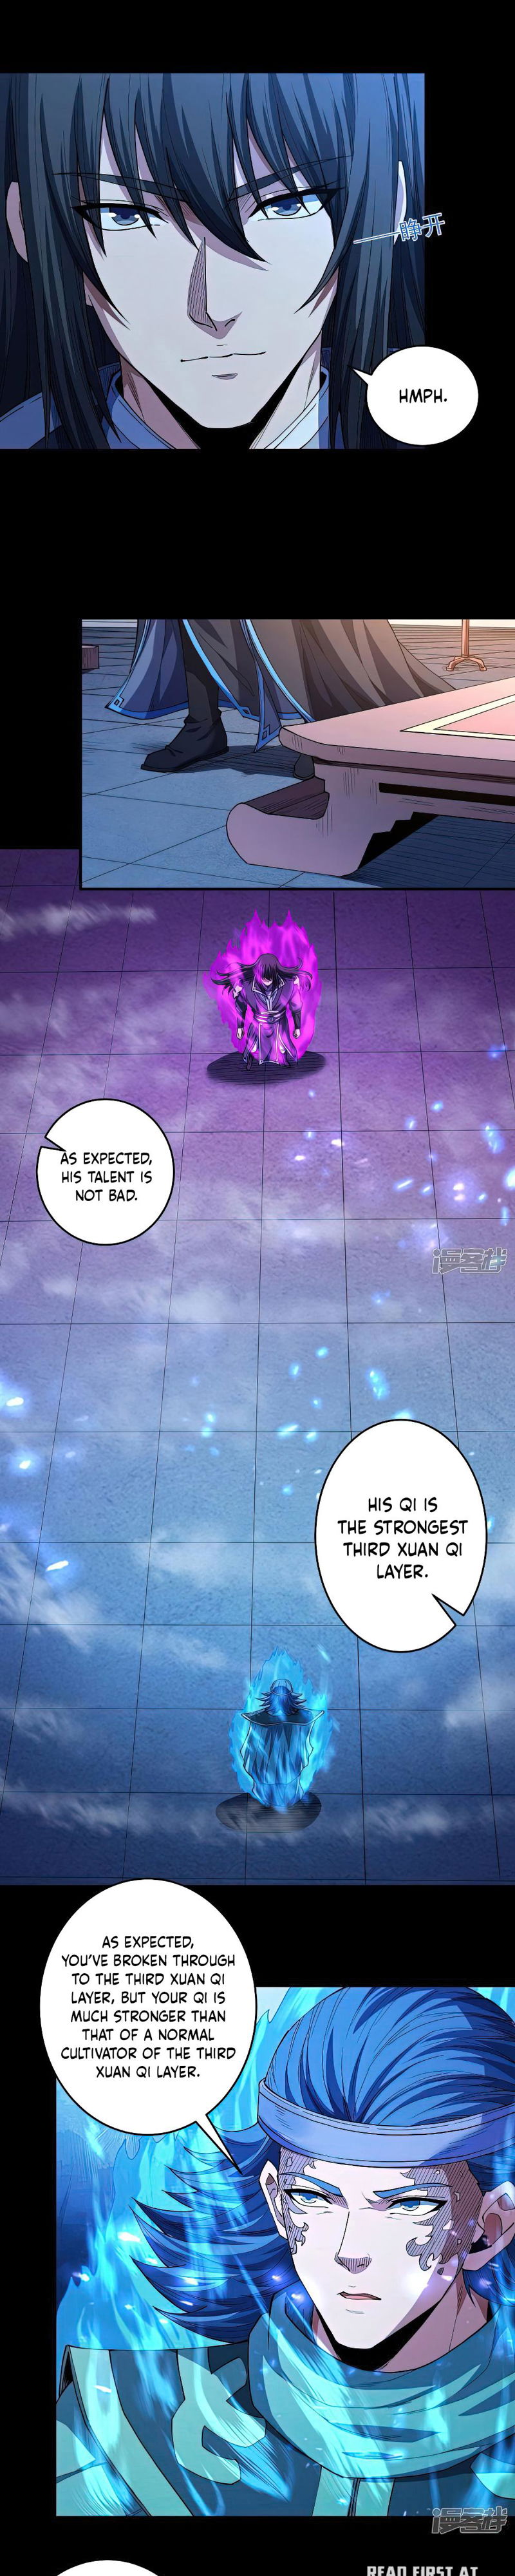 God of Martial Arts Chapter 606 page 5